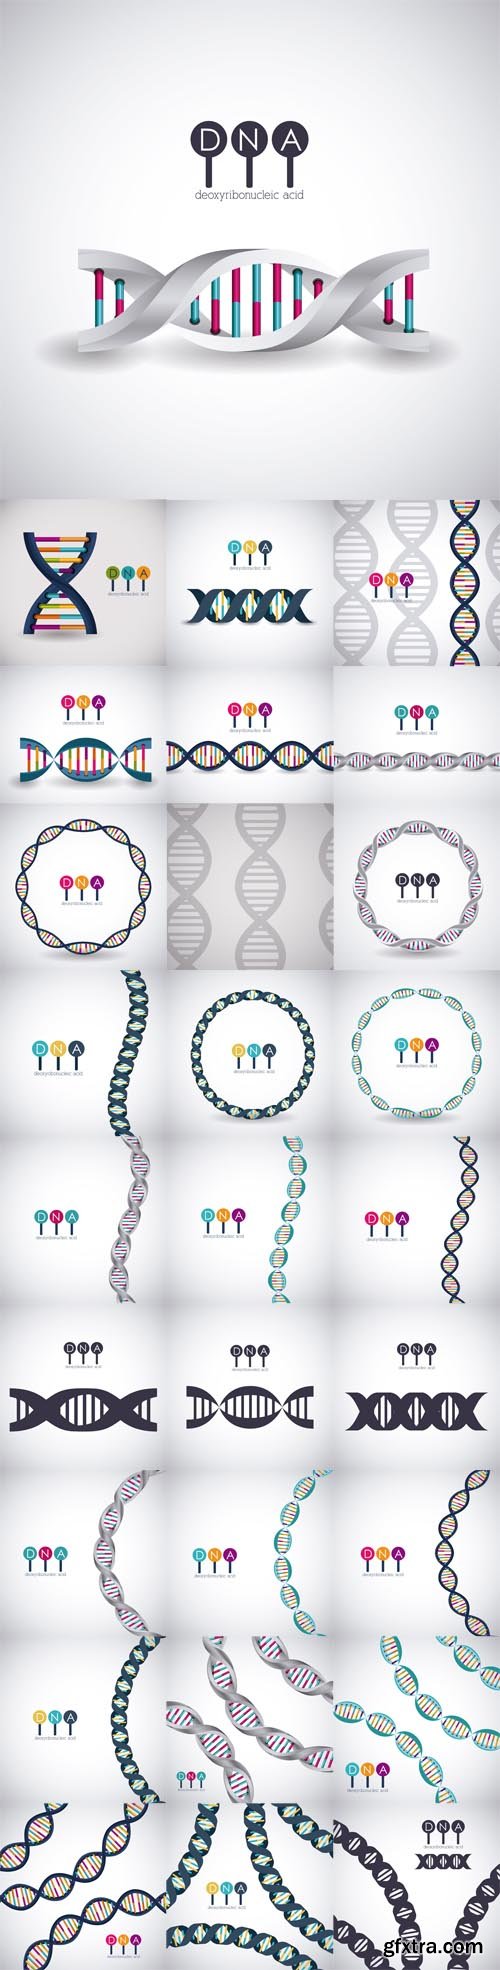 Vector Set - Dna structure chromosome icon. Science molecule genetic and biology theme